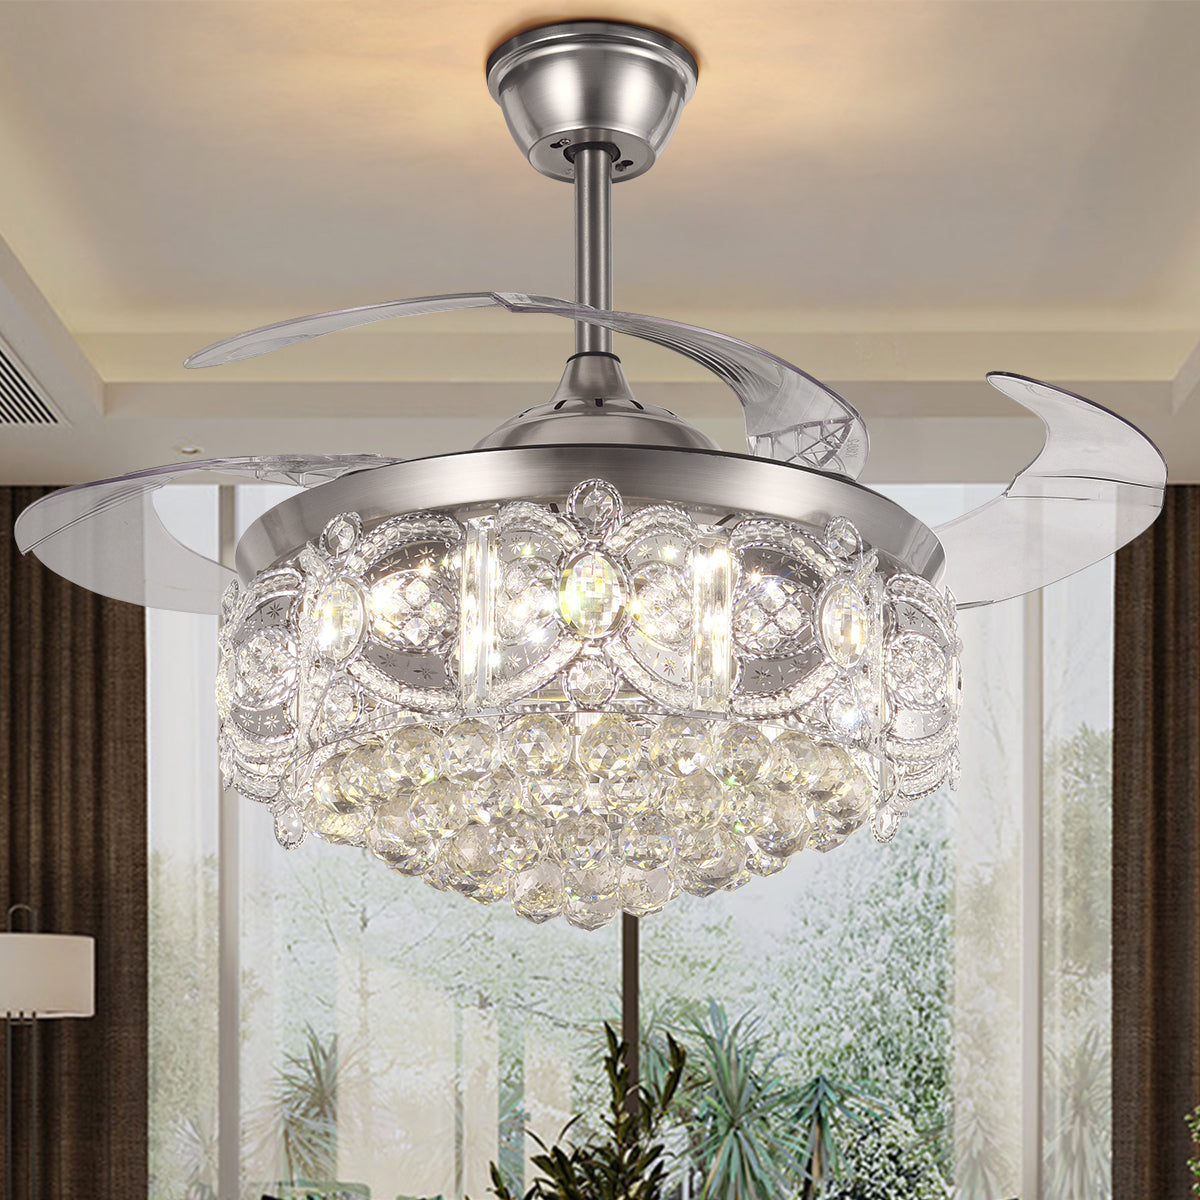 42" Silver Crystal Celing Fan with LED Lights DS-FH41